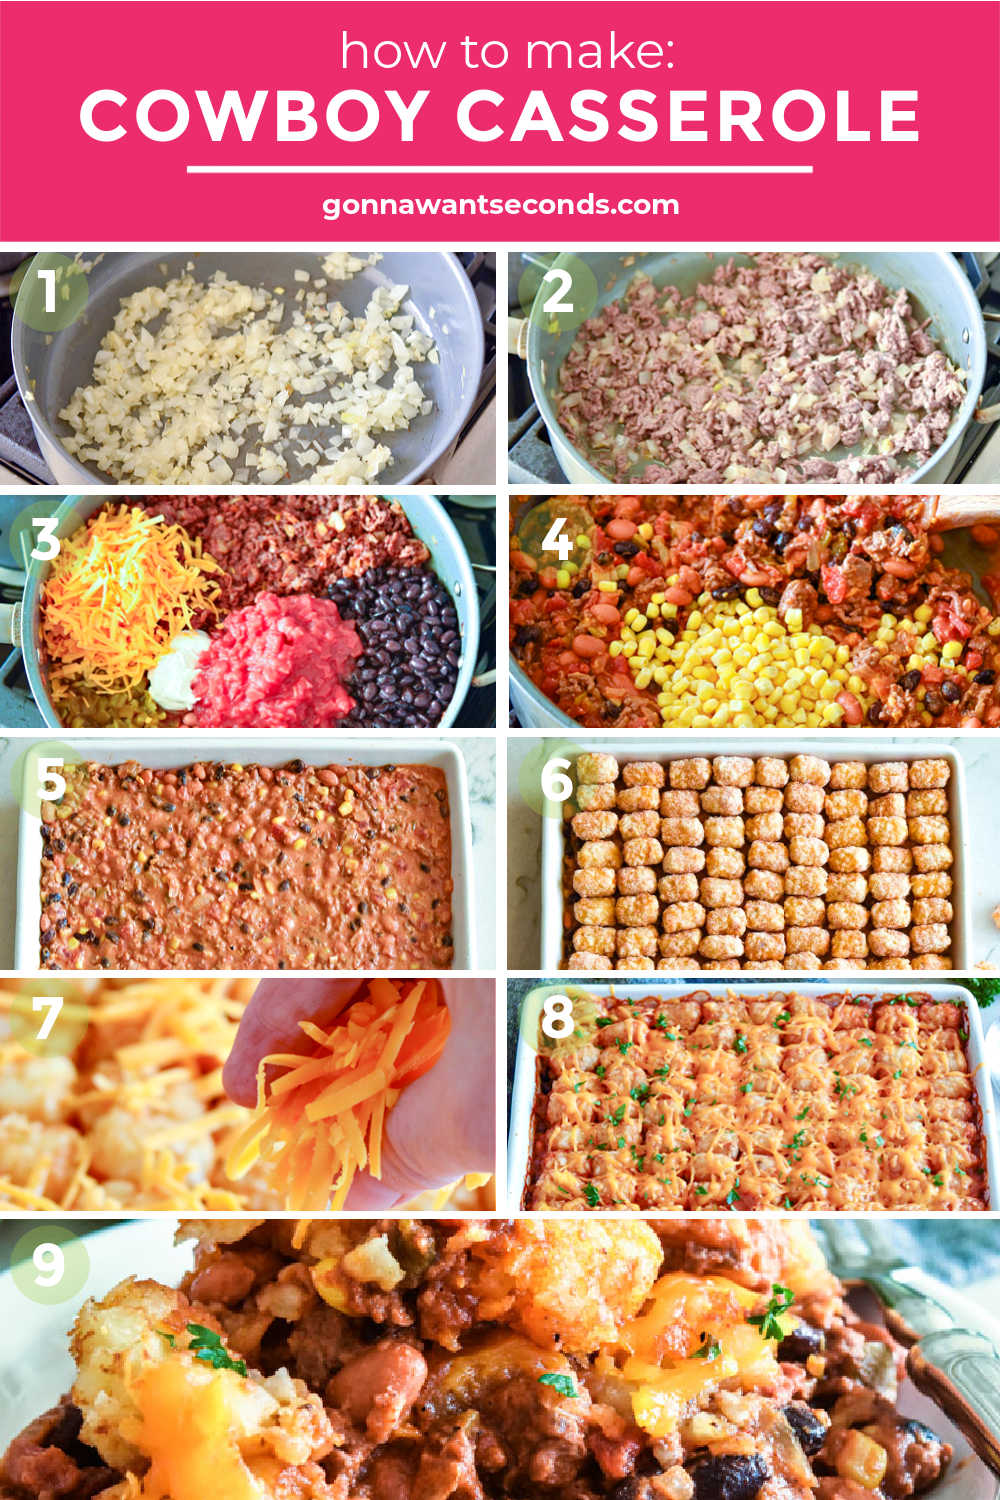 Step by step how to make cowboy casserole